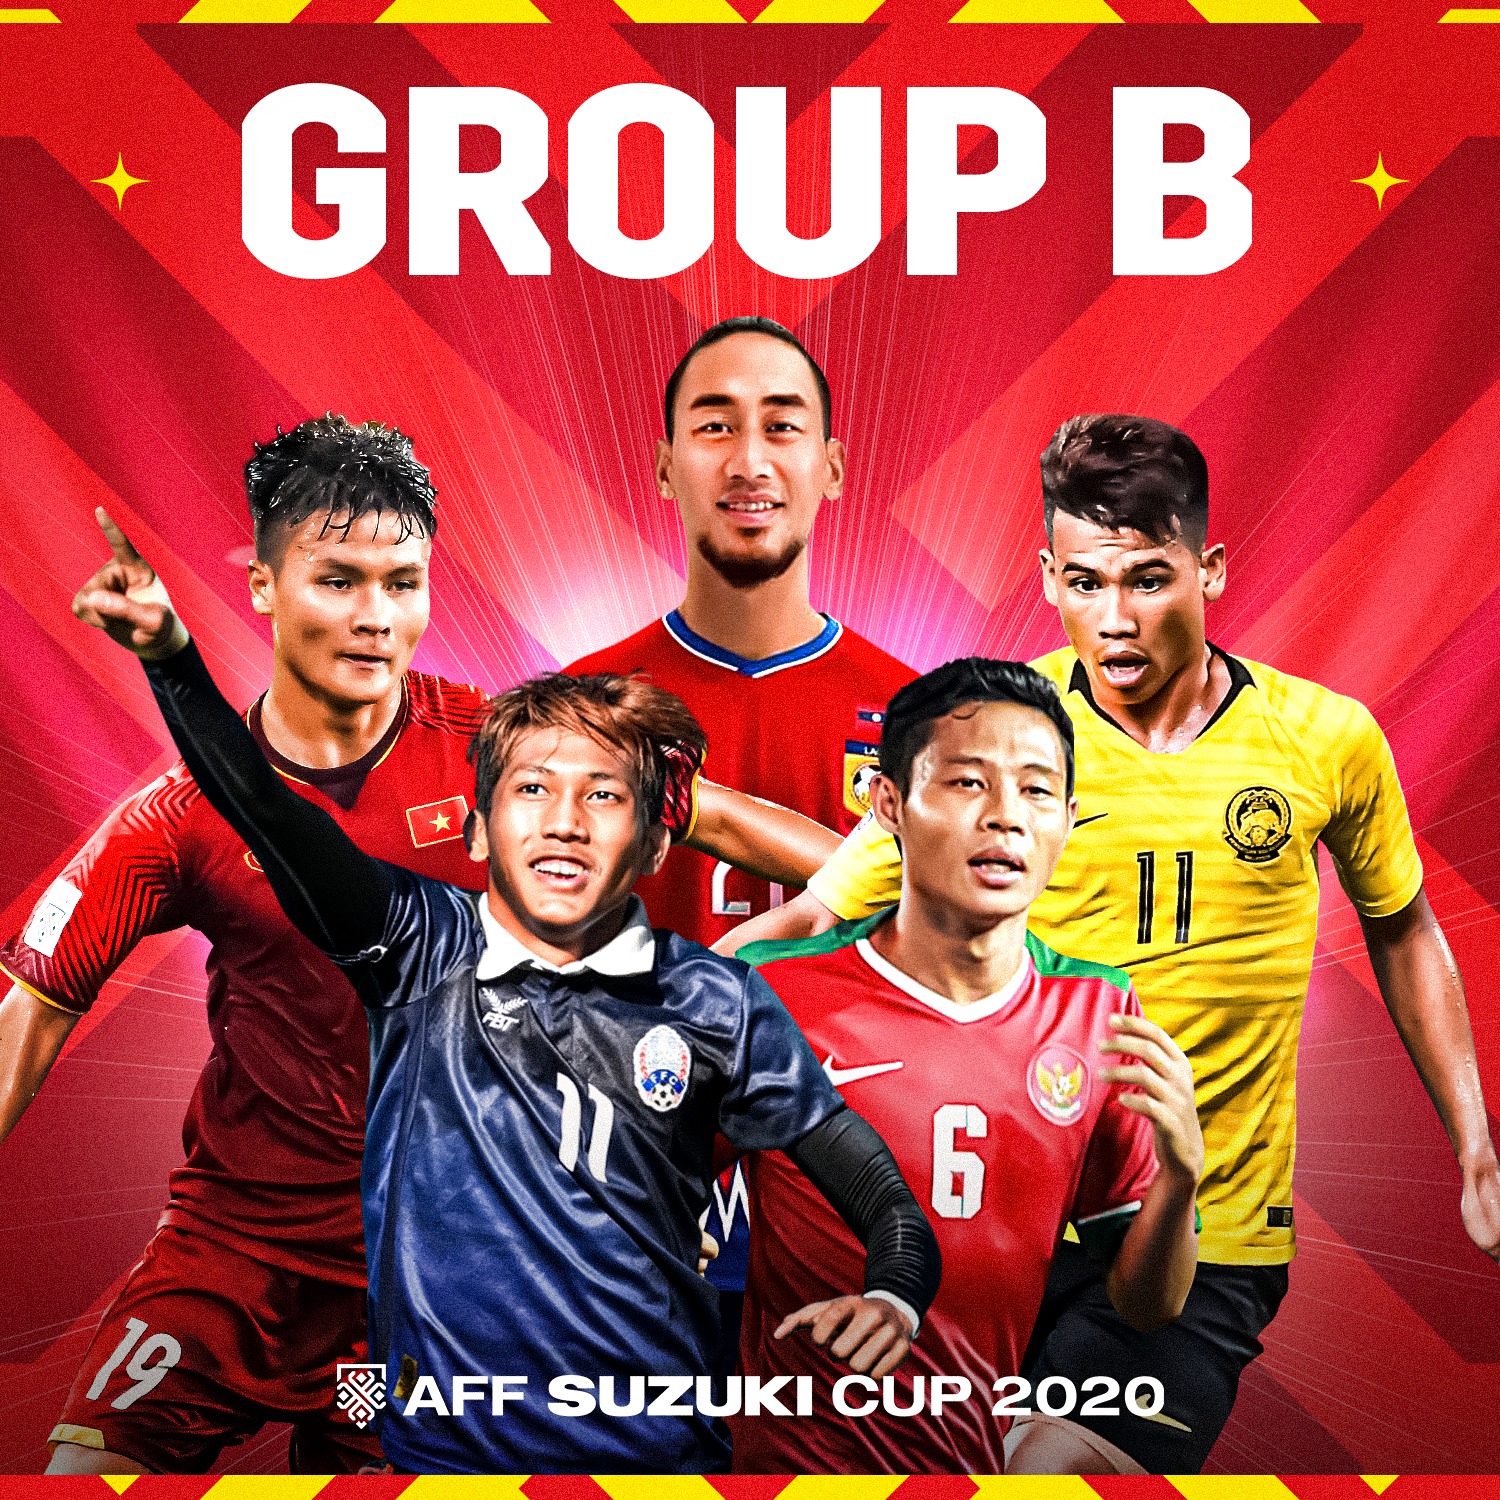 AFF Suzuki Cup 2020 Group B Previews of Vietnam, Malaysia, Laos, Cambodia and Indonesia!